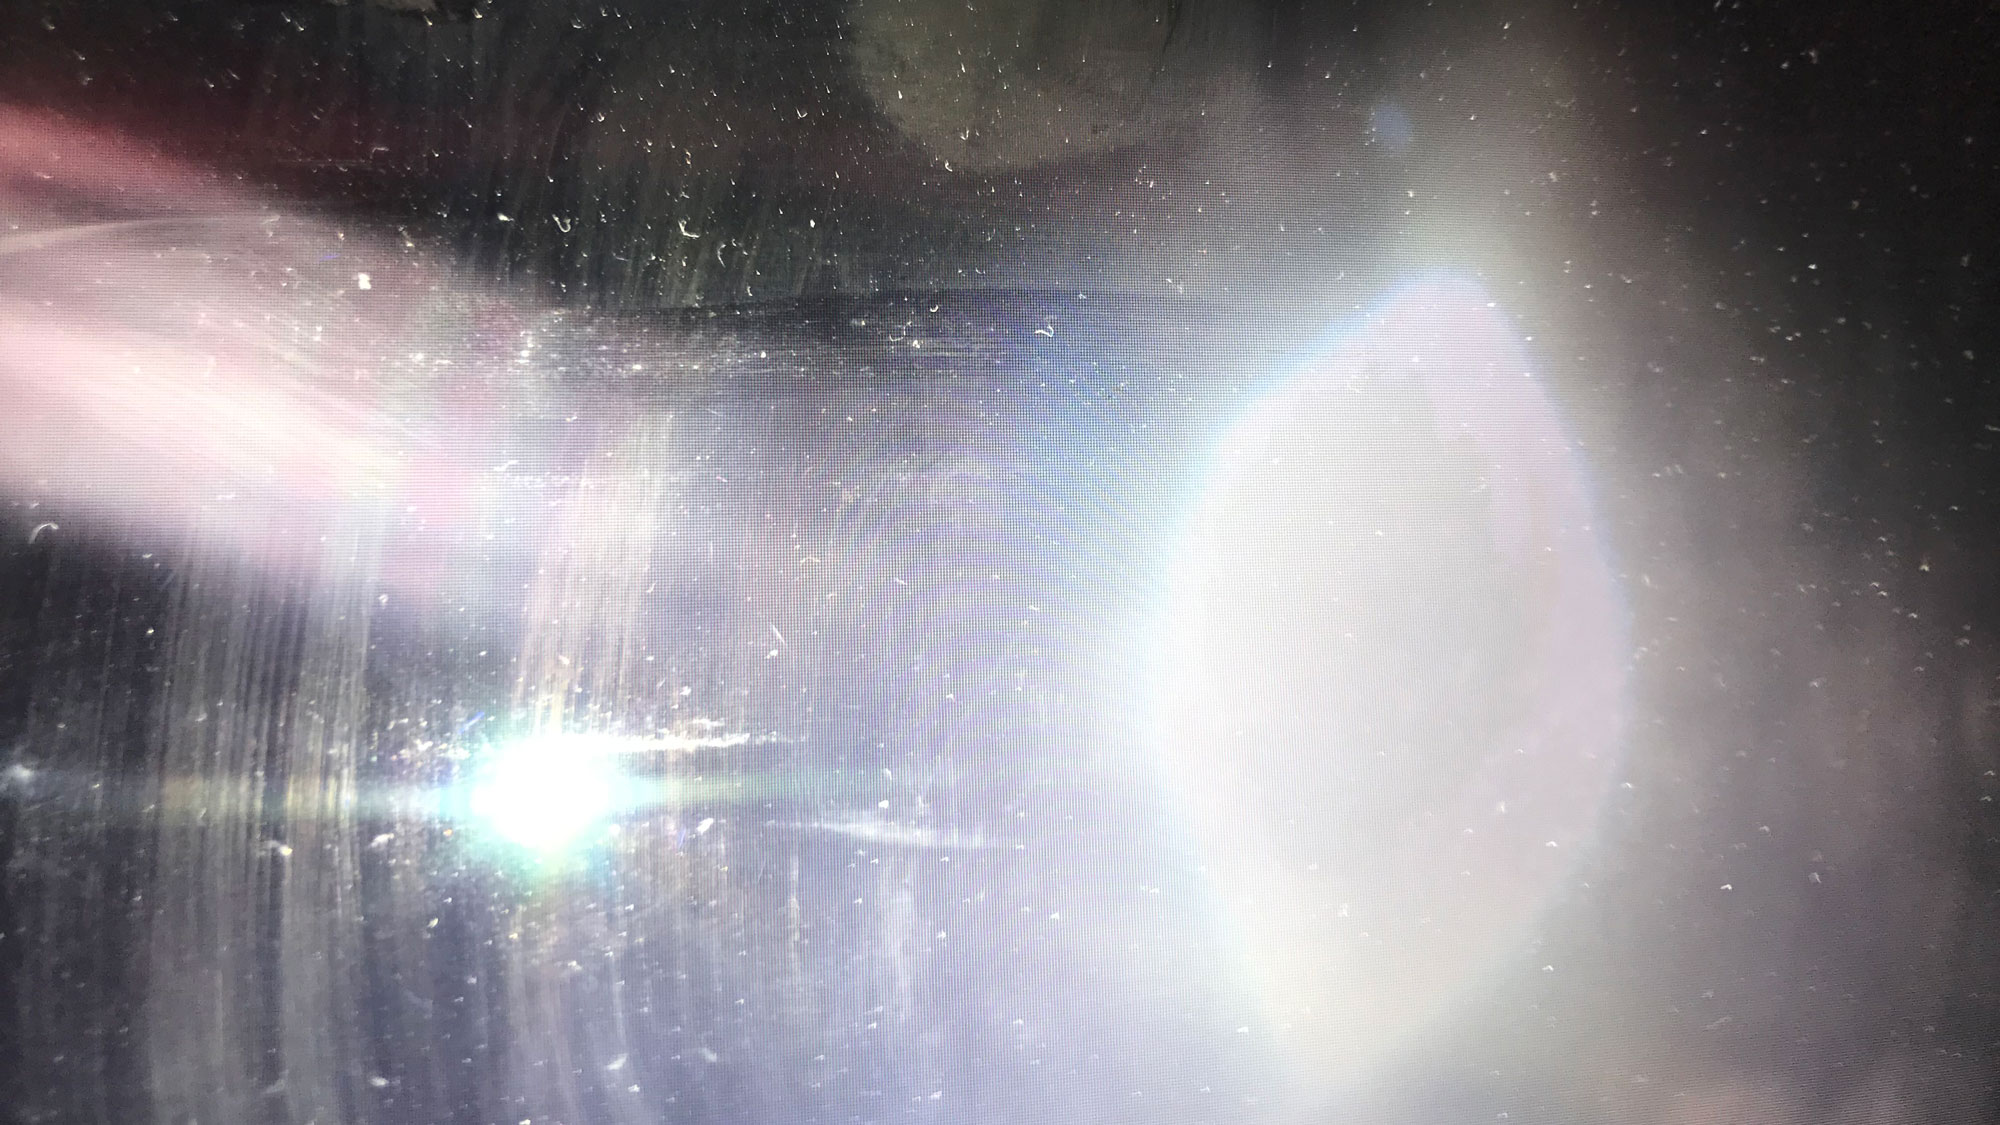 A white light, oval shaped lens flare through a dirty pane of glass.